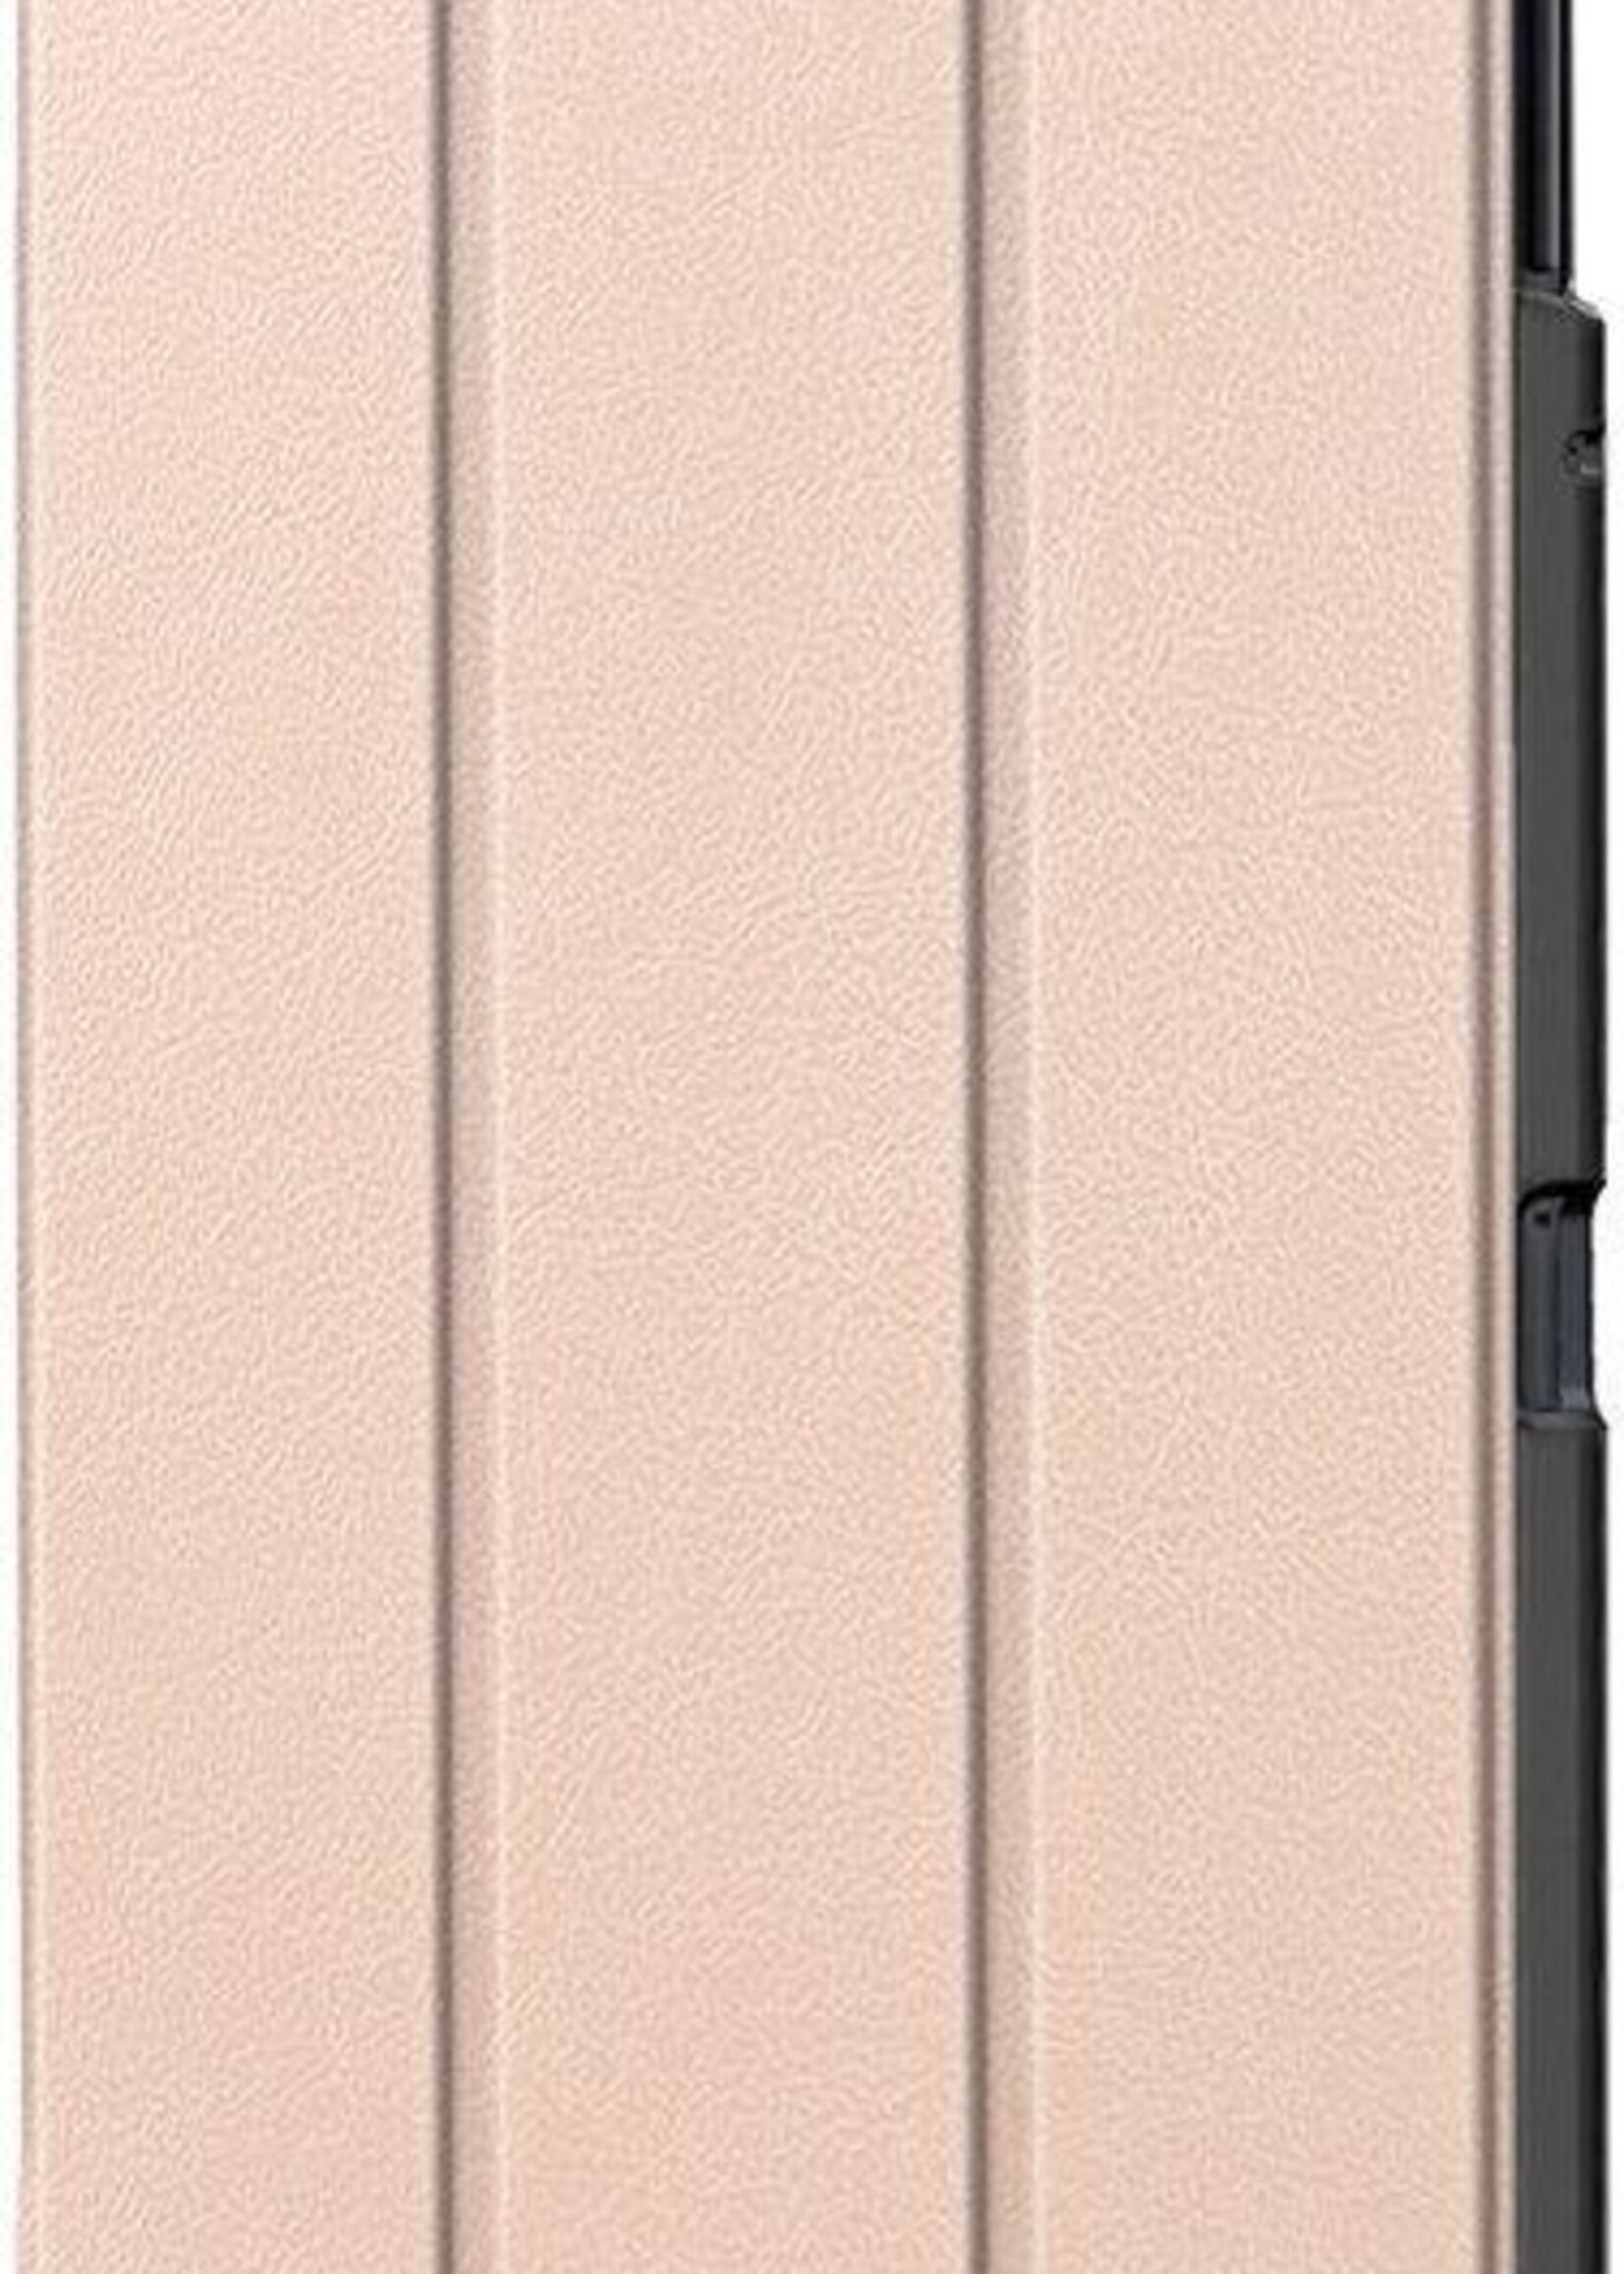 BTH Hoes Geschikt voor Samsung Galaxy Tab A 10.5 2018 Hoes Book Case Hoesje Trifold Cover - Hoesje Geschikt voor Samsung Tab A 10.5 2018 Hoesje Bookcase - Goud